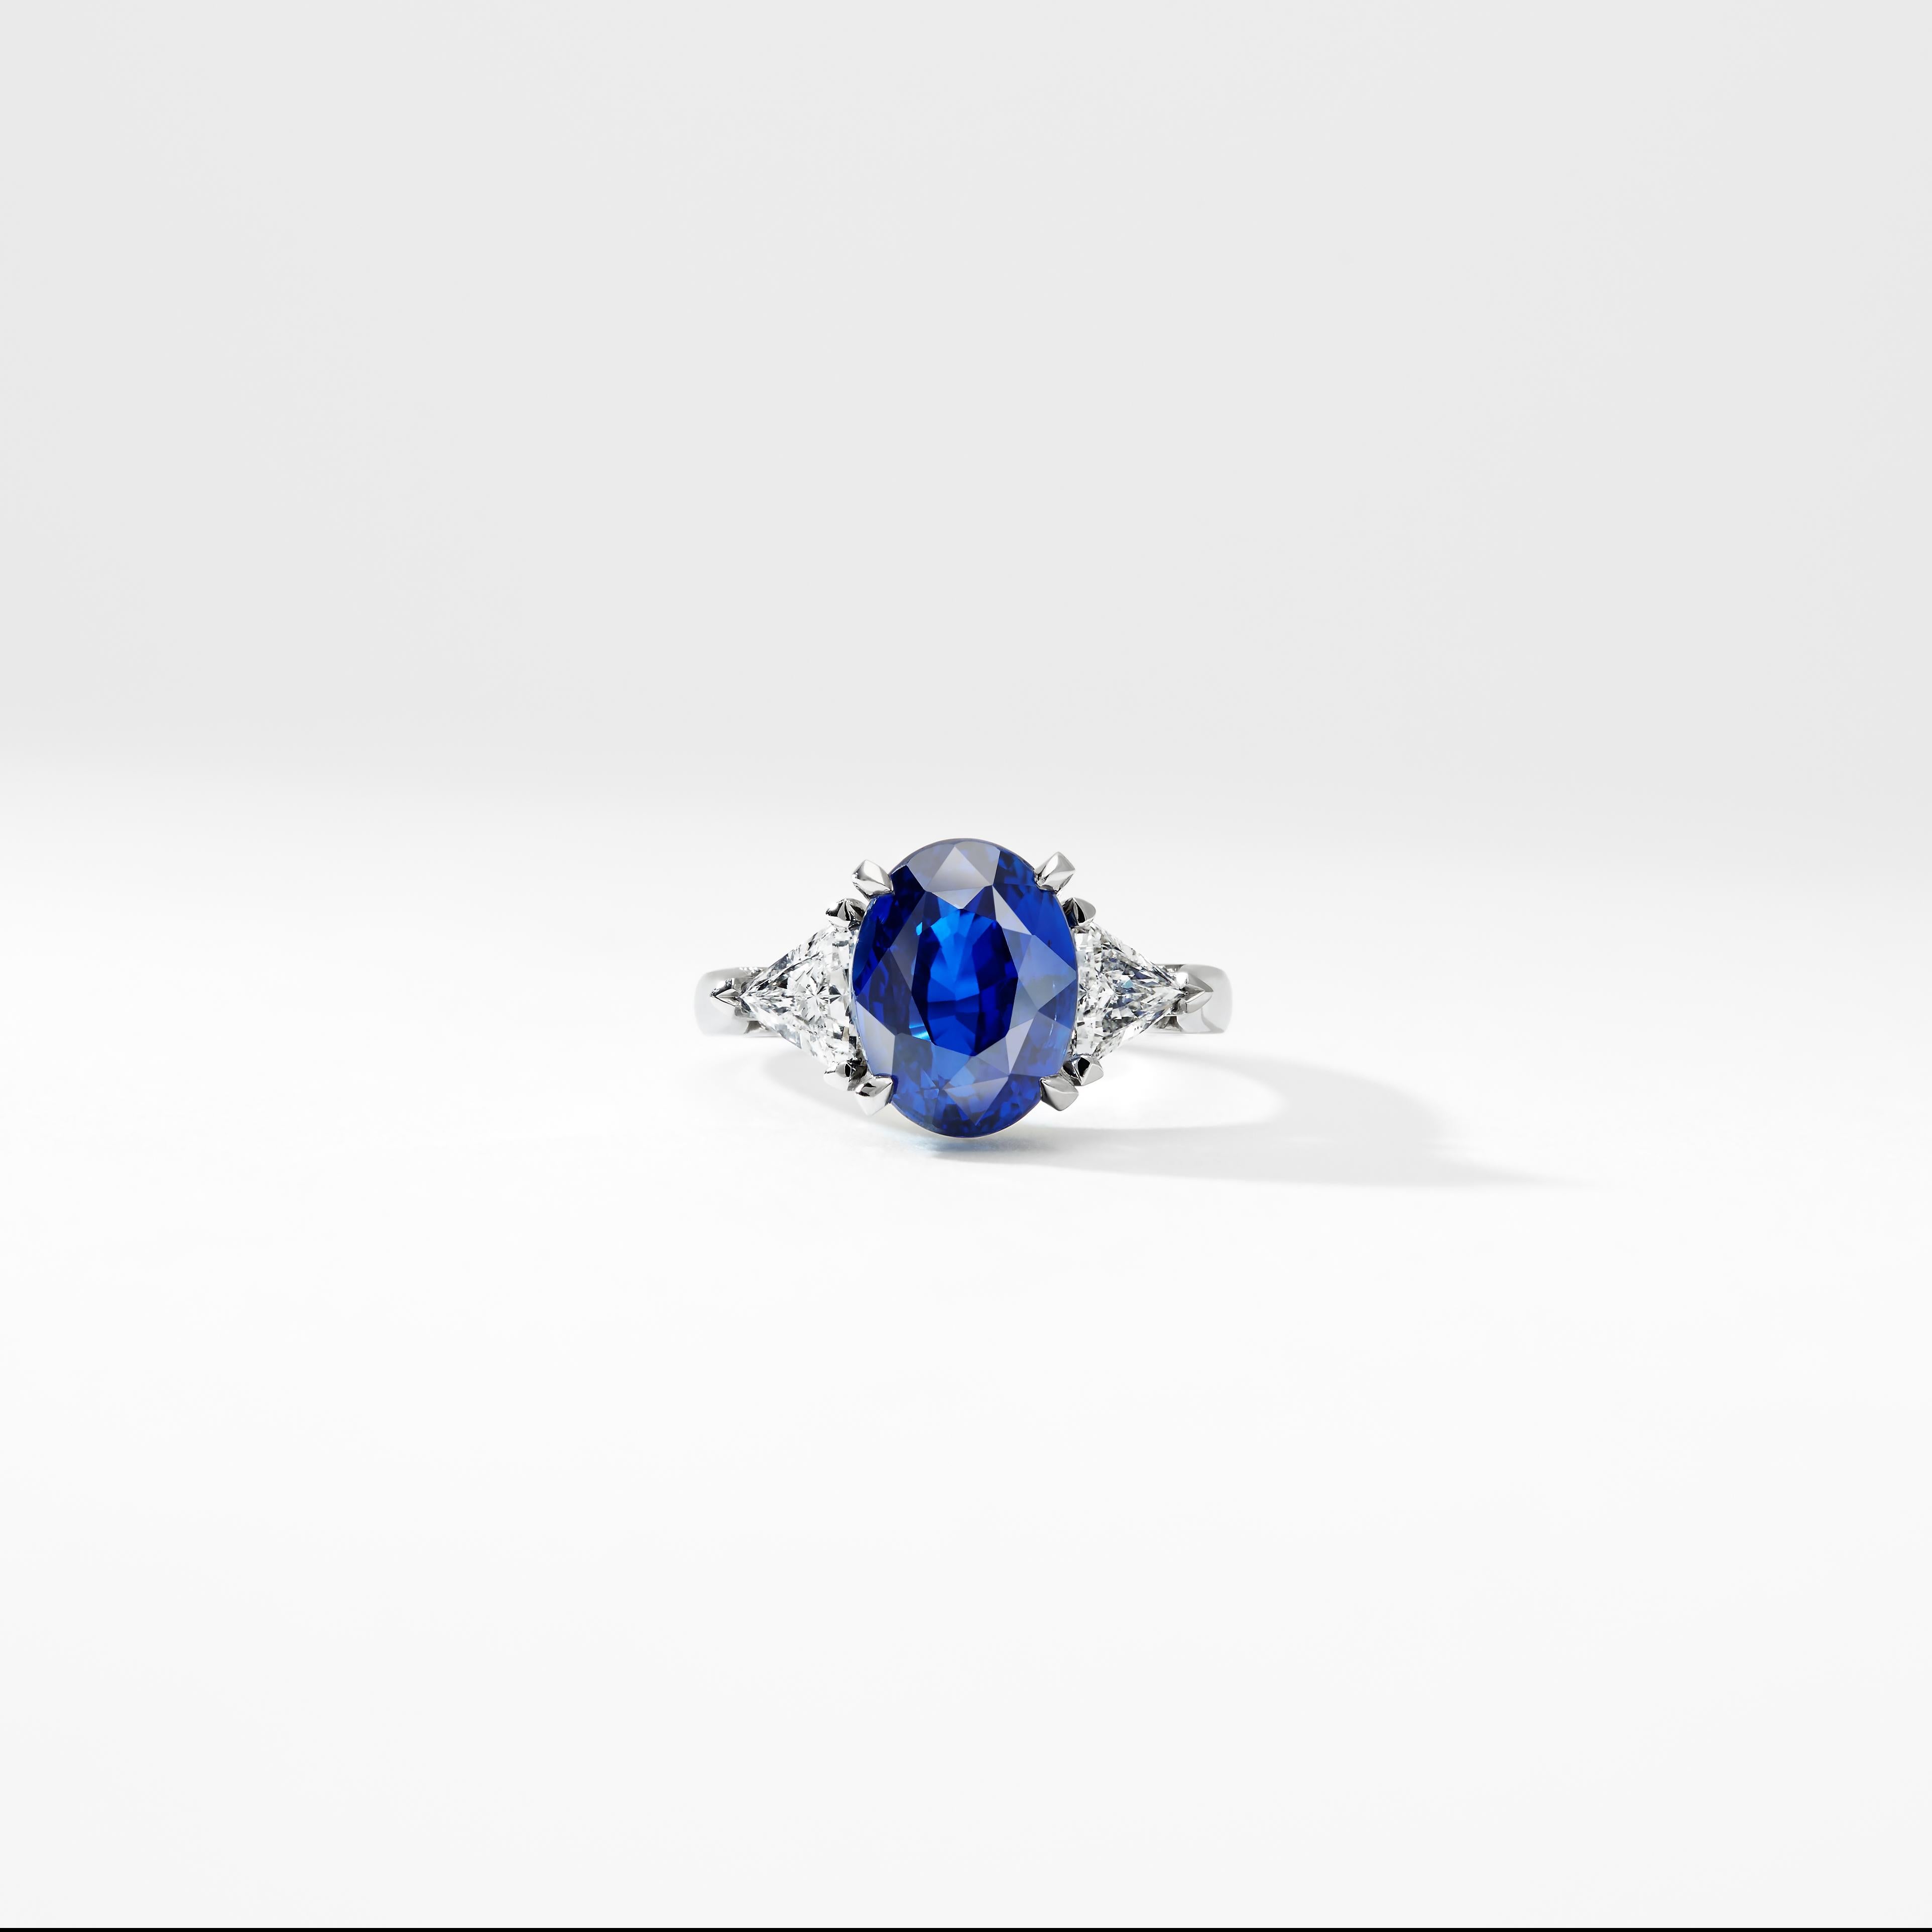 Fabergé Platinum Oval 5.12ct Royal Blue Sapphire Ring Set With White Diamonds In New Condition For Sale In London, GB